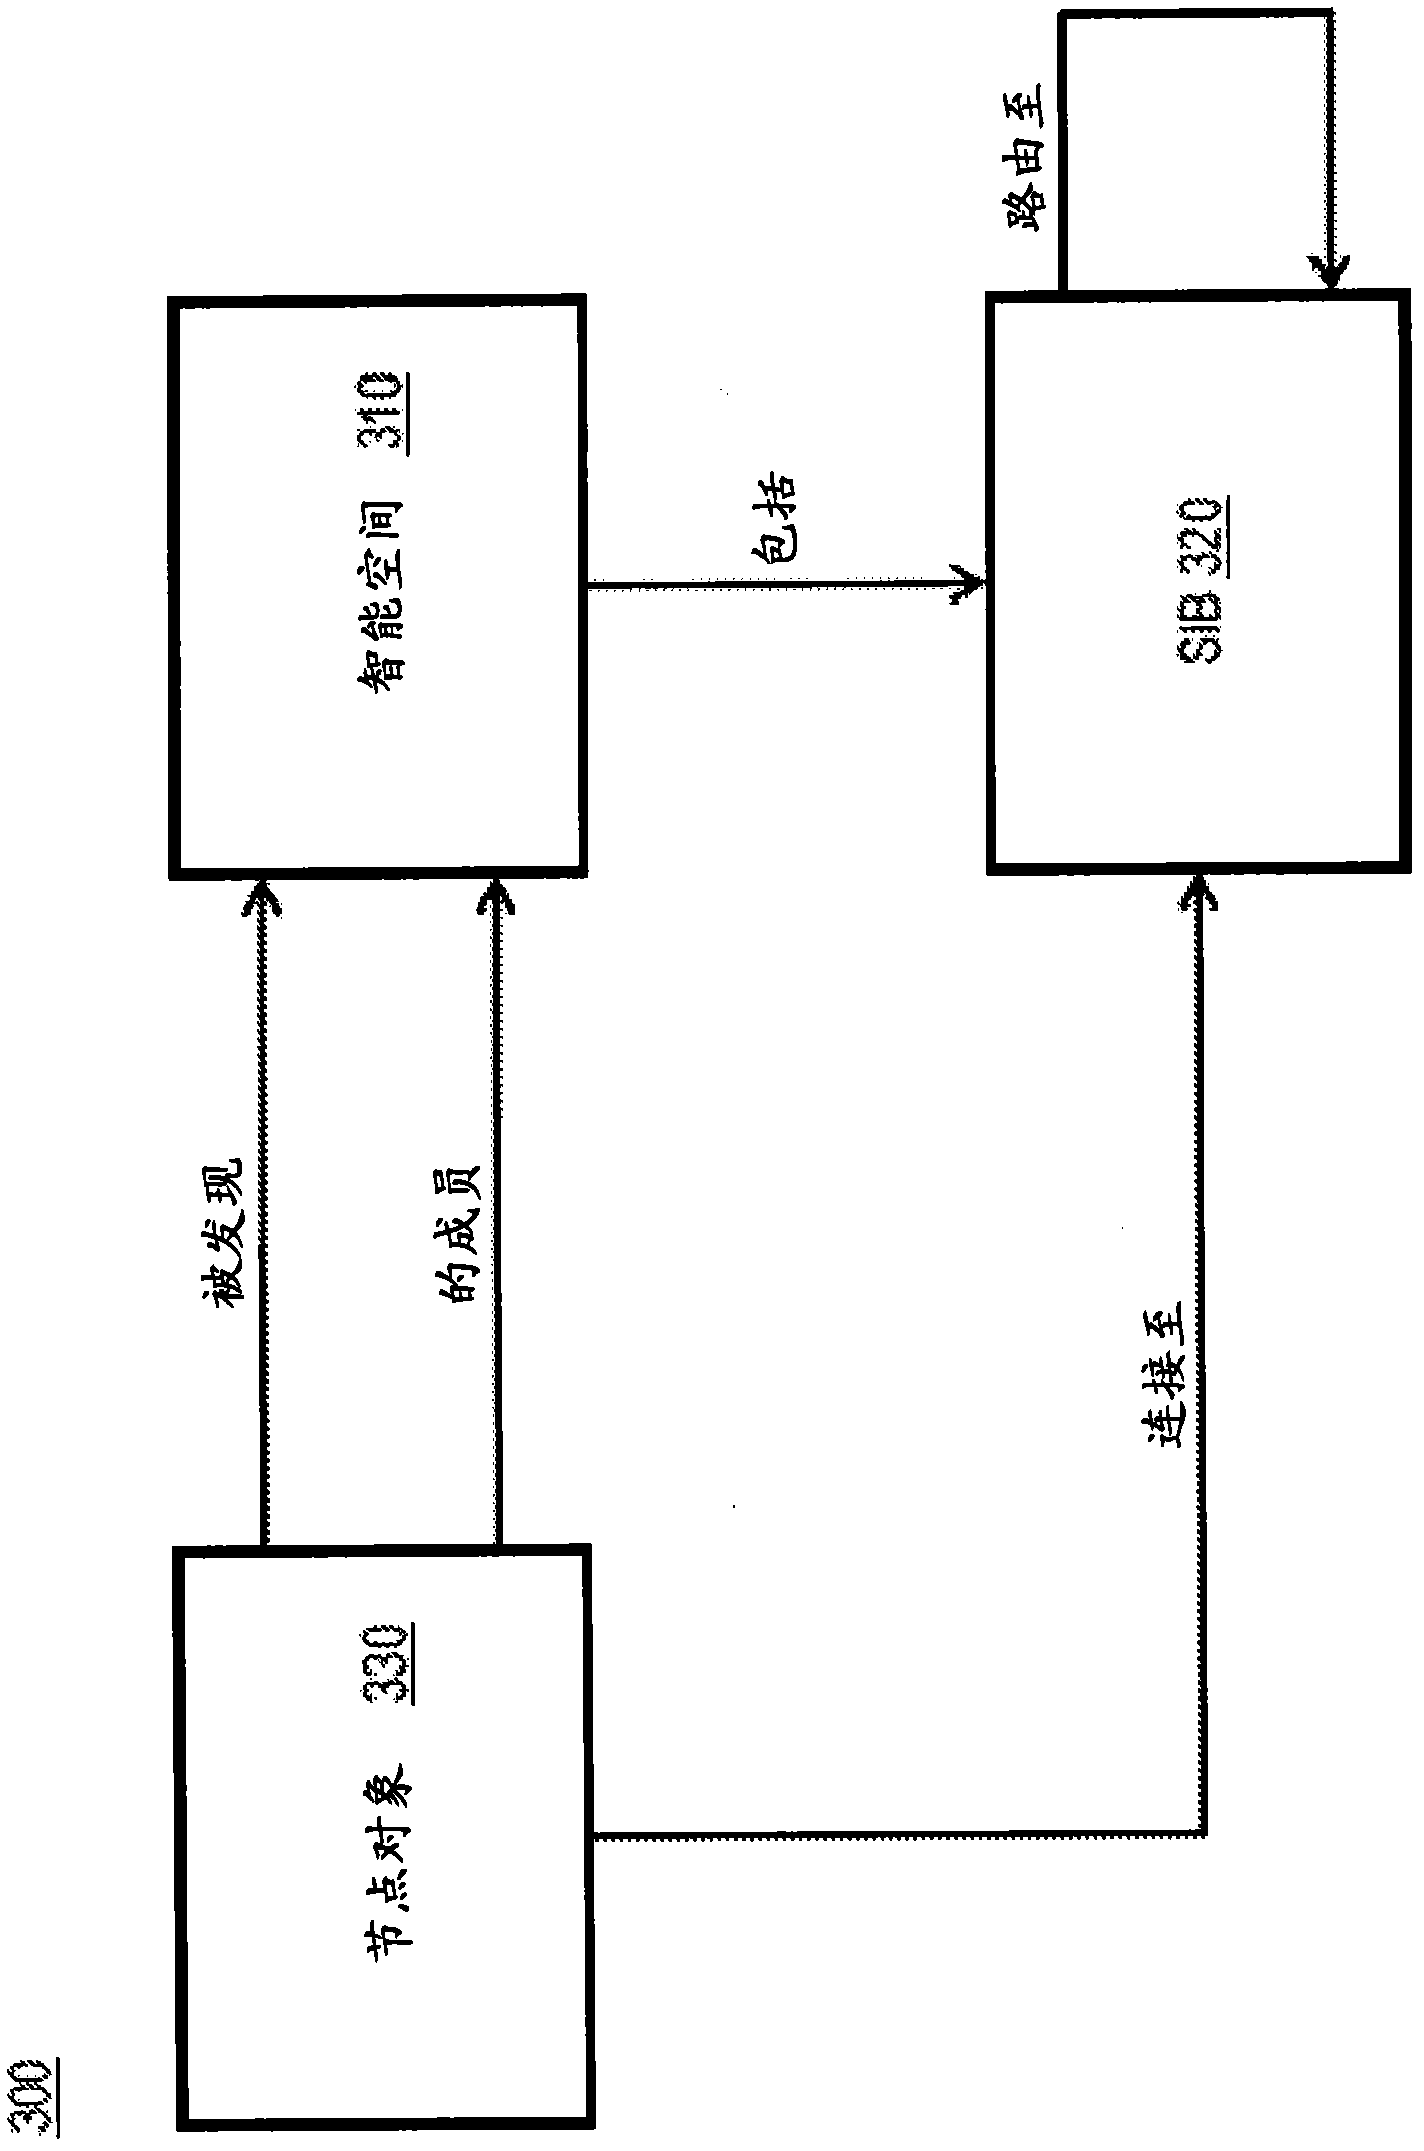 Method and apparatus for selective sharing of semantic information sets